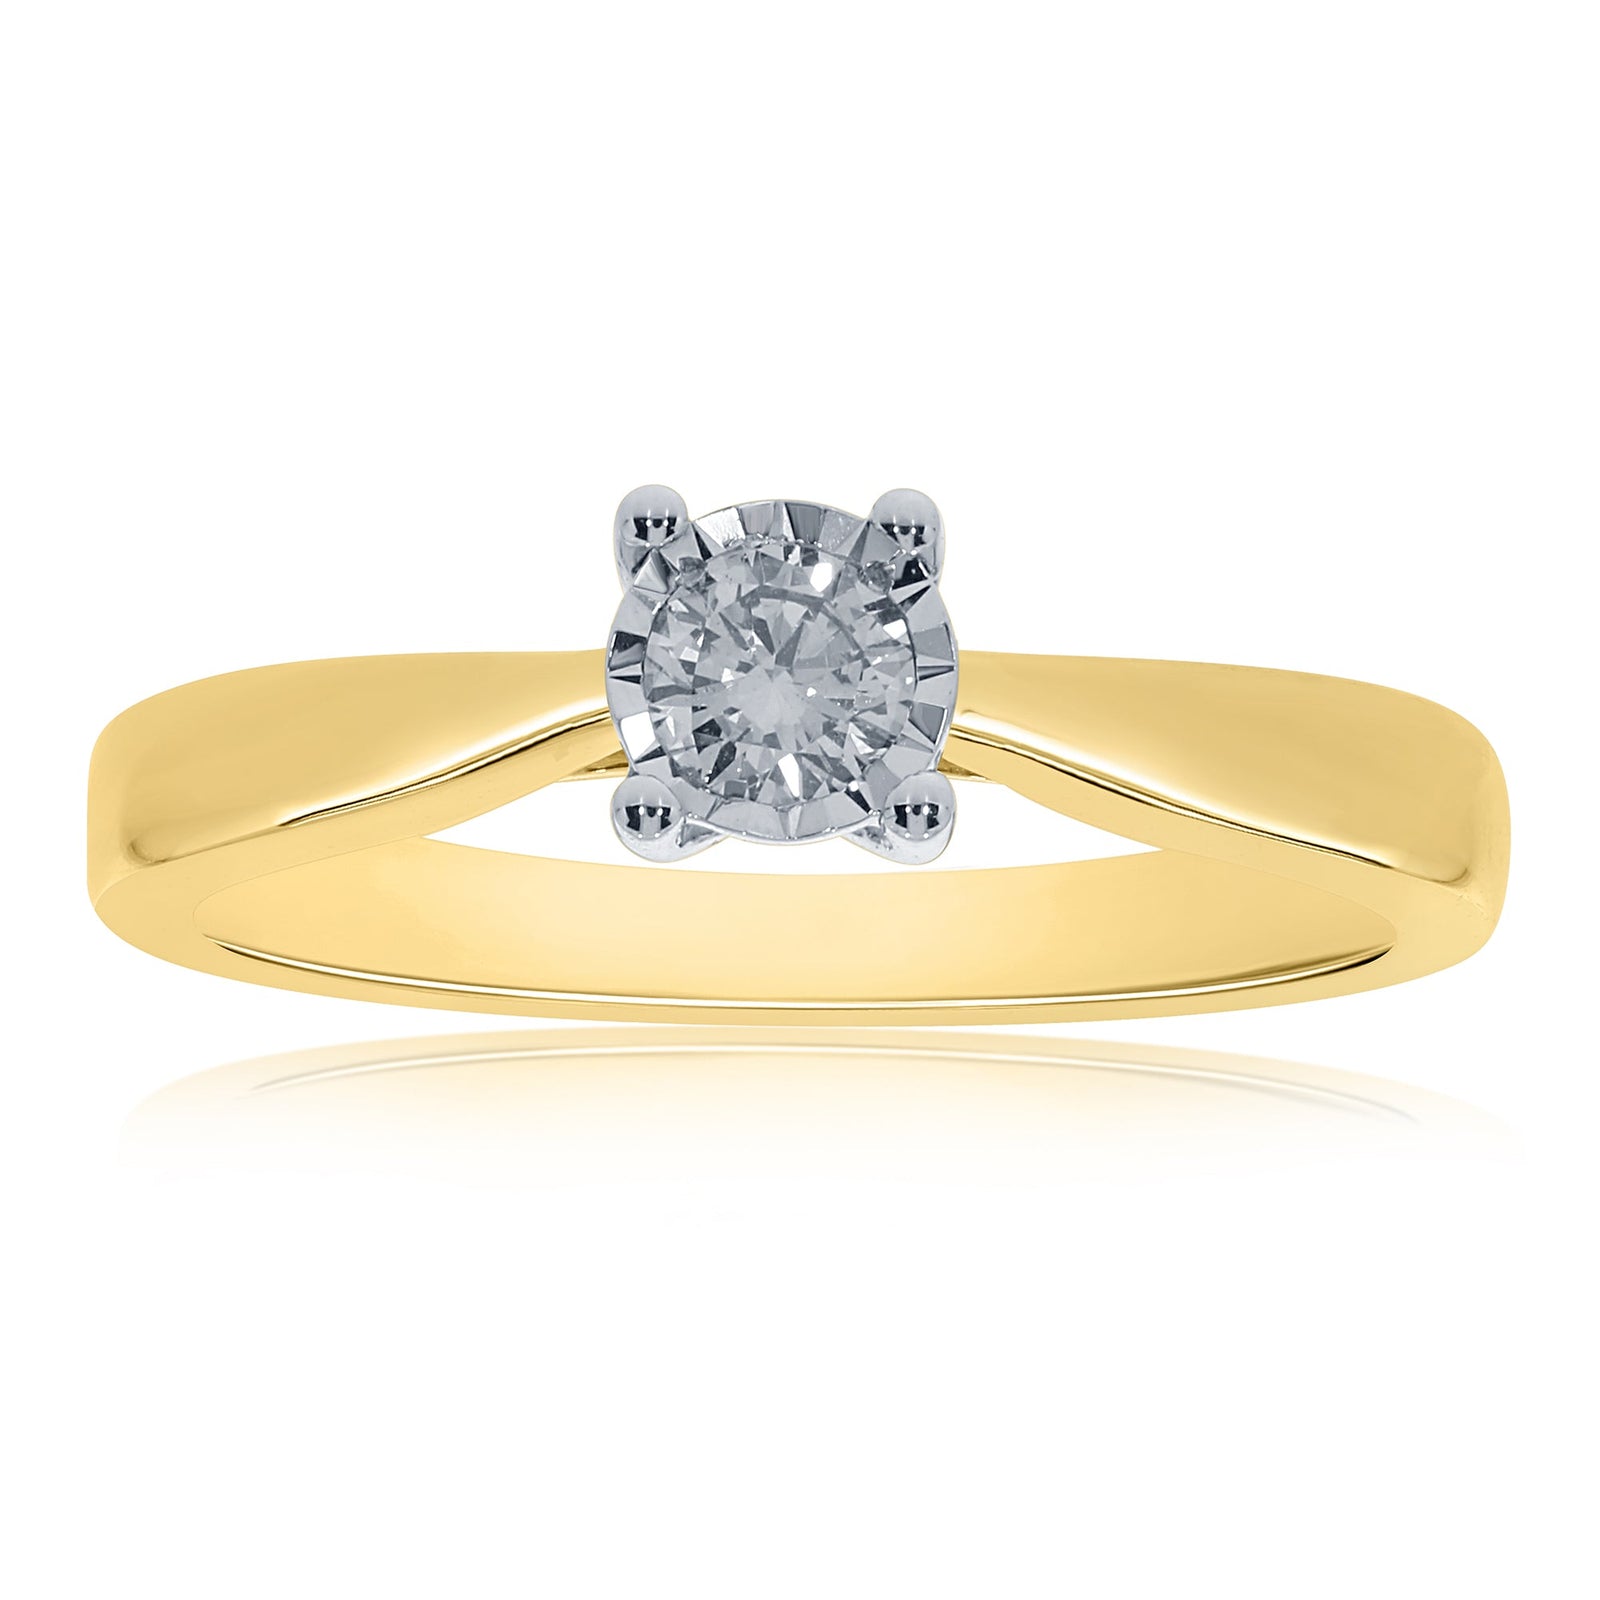 9ct gold single stone miracle plate diamond ring 0.25ct